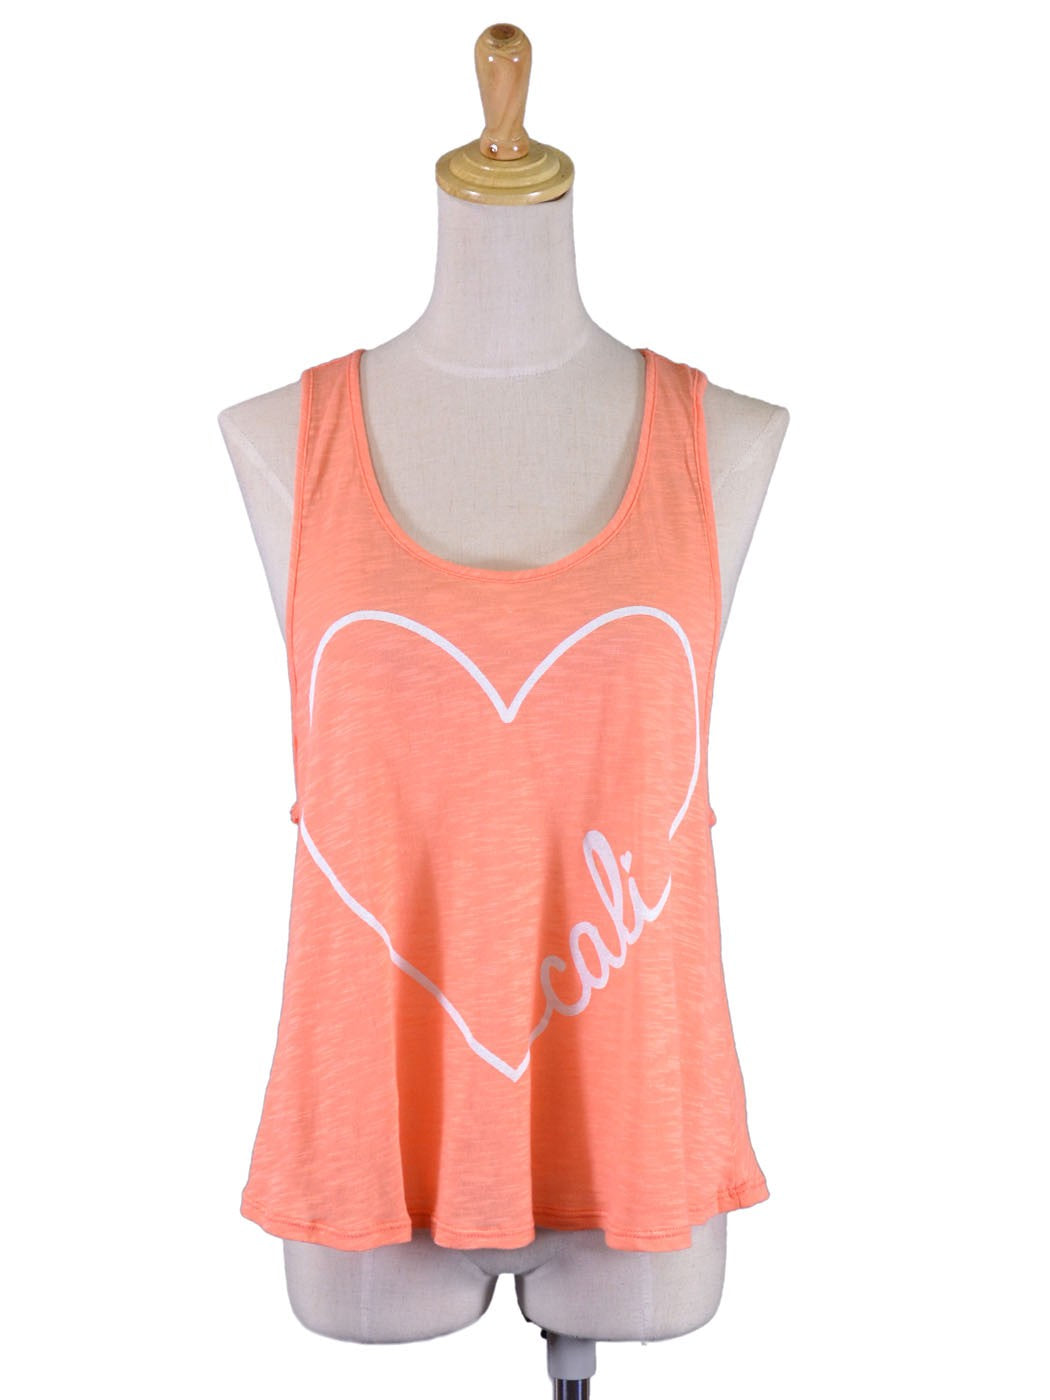 Michelle Fun Expressive Give Me Love Cali Racerback Knit Loose Fit Tank Top